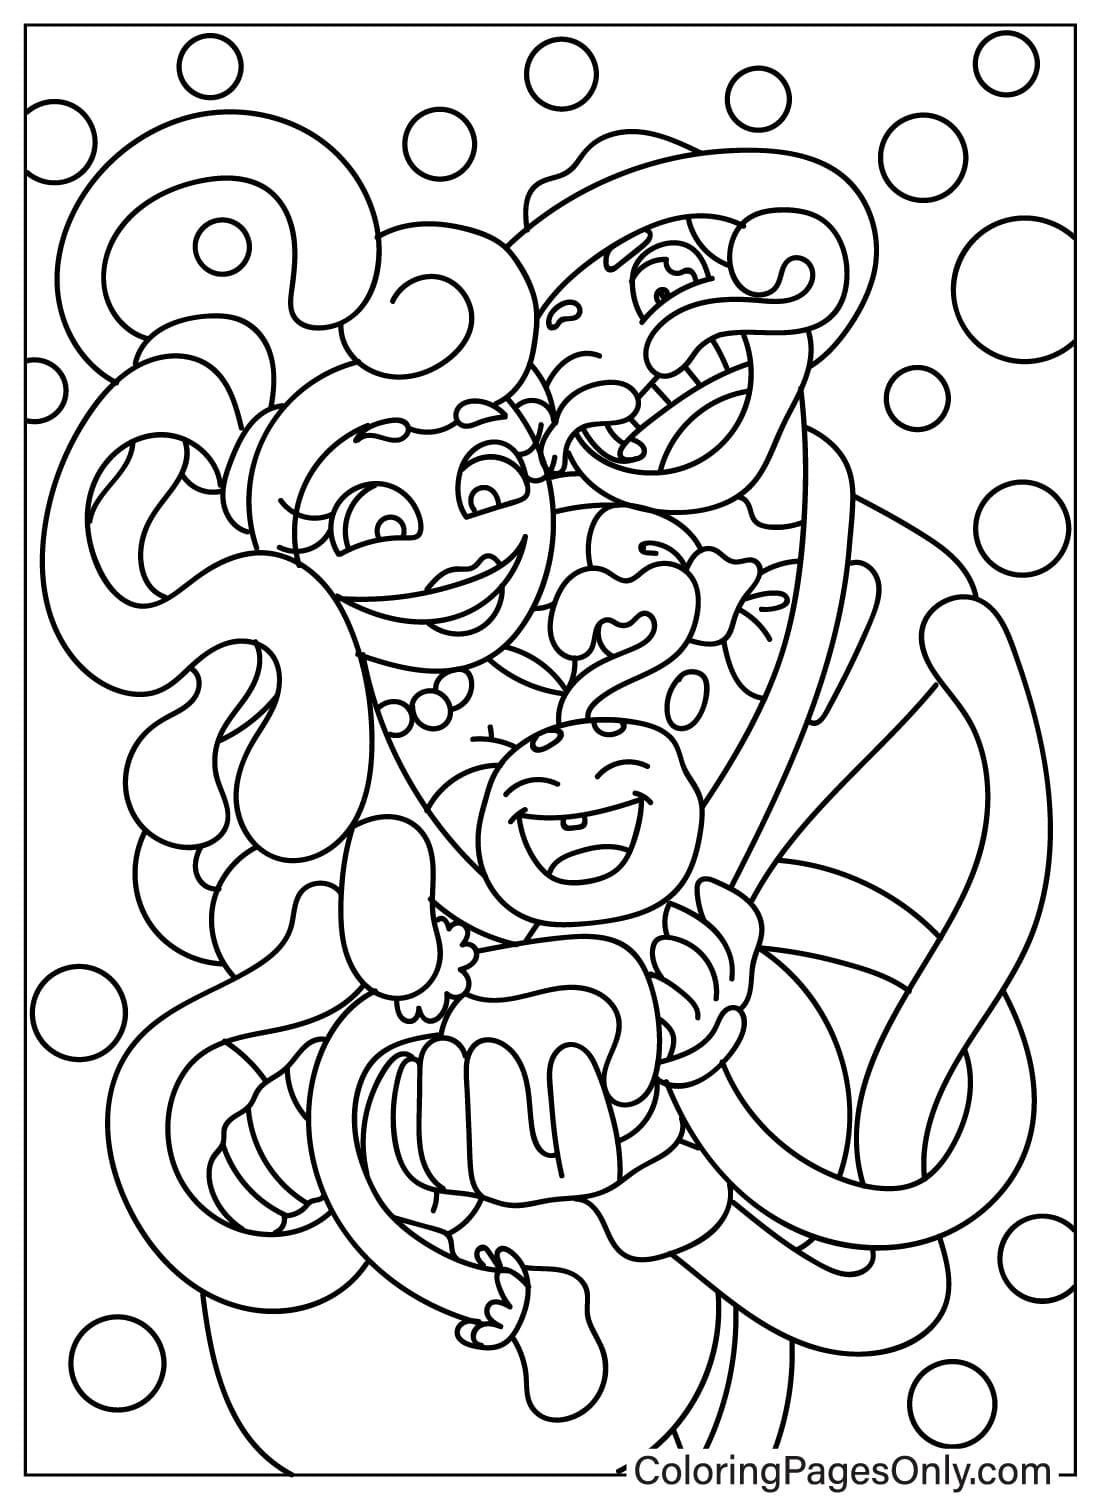 Mommy Long Legs Family Coloring Page from Poppy Playtime